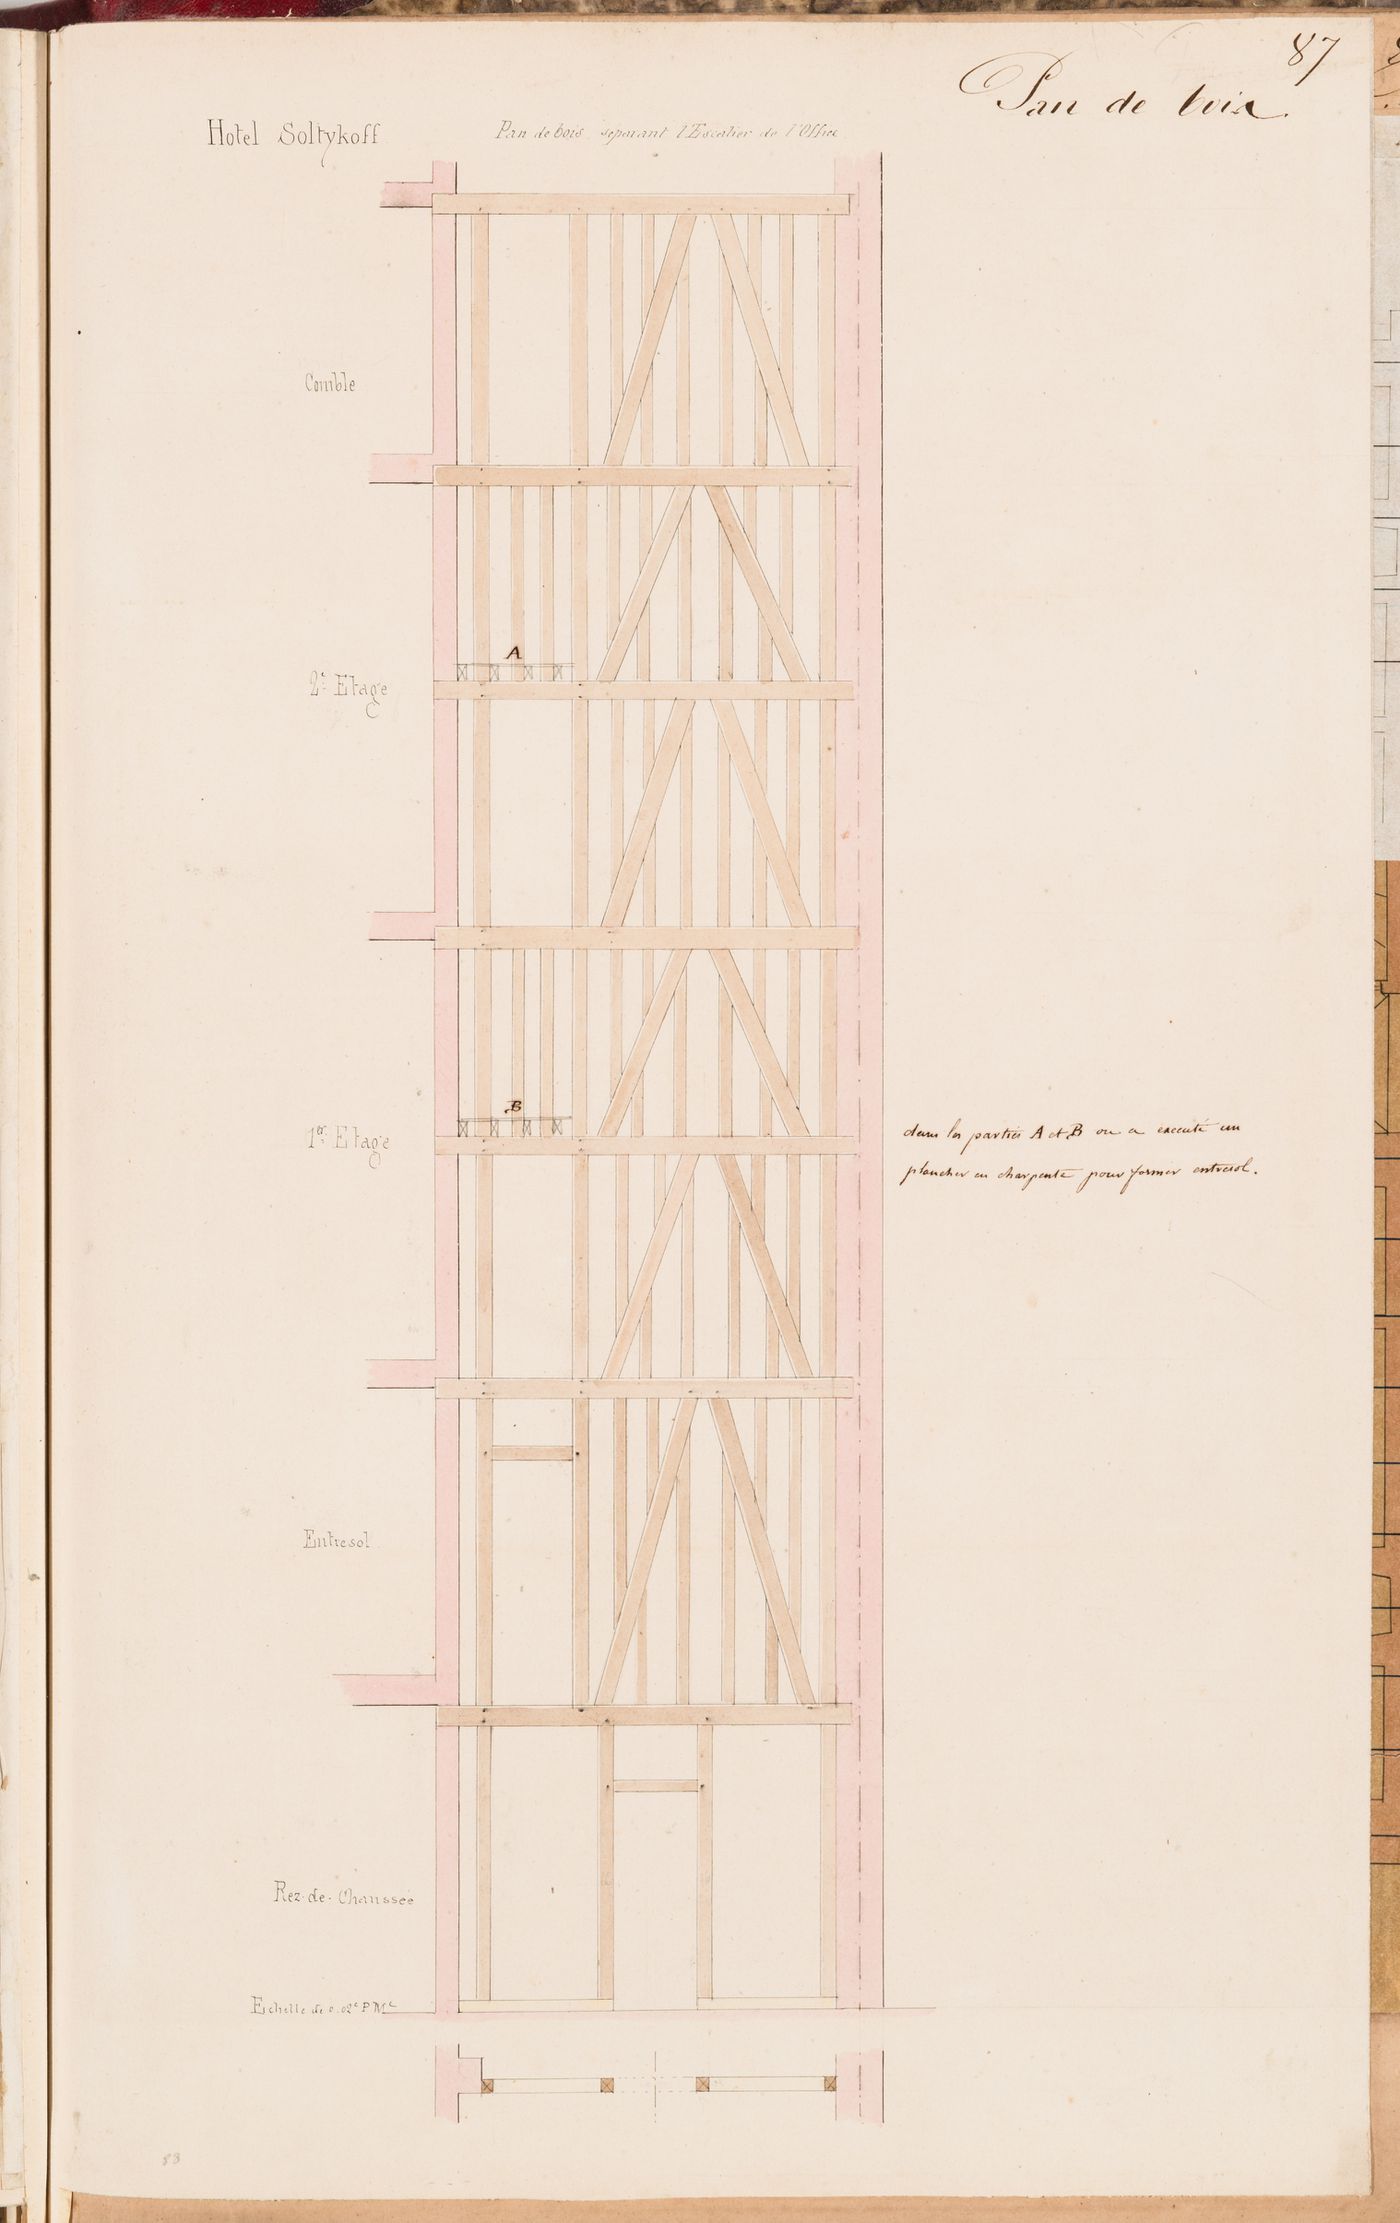 Section showing the wood frame construction between the office and the adjacent stairs, Hôtel Soltykoff